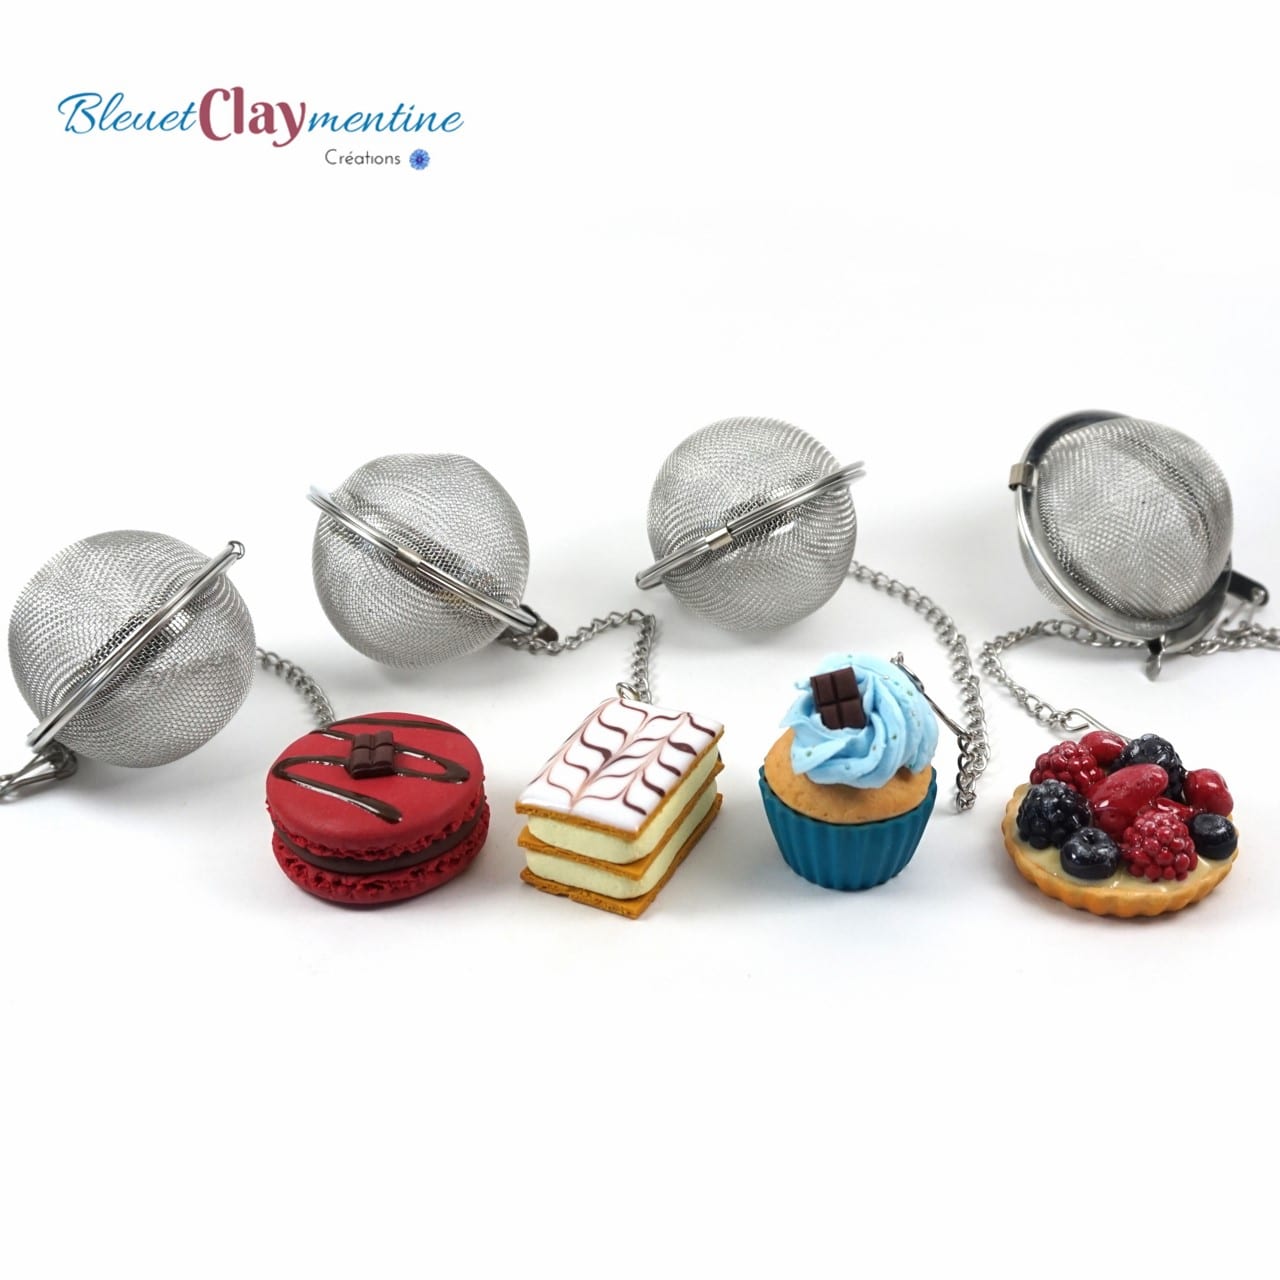 https://bleuetclaymentine.fr/wp-content/uploads/2018/06/boules-%C3%A0-th%C3%A9-gourmandes-macaron-mille-feuille-cupcake-tarte-polym%C3%A8re-fimo-polymerclay.jpg